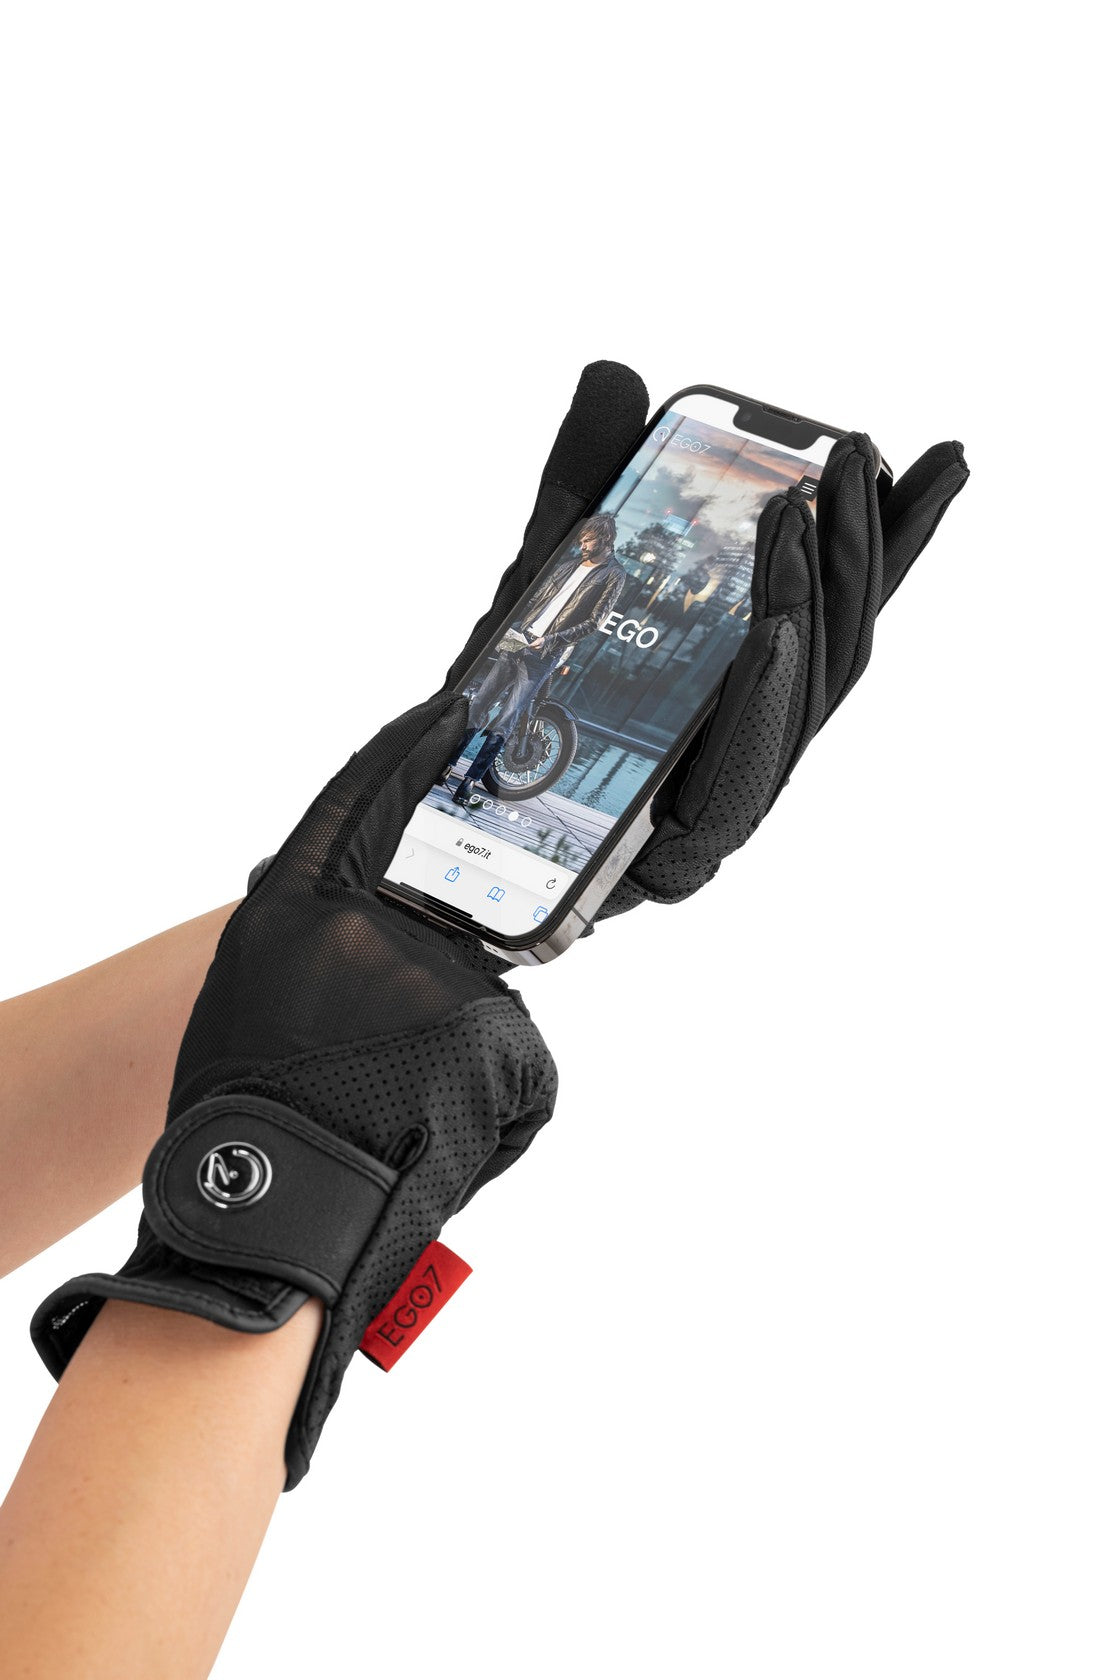 riding gloves with touch screen fingers